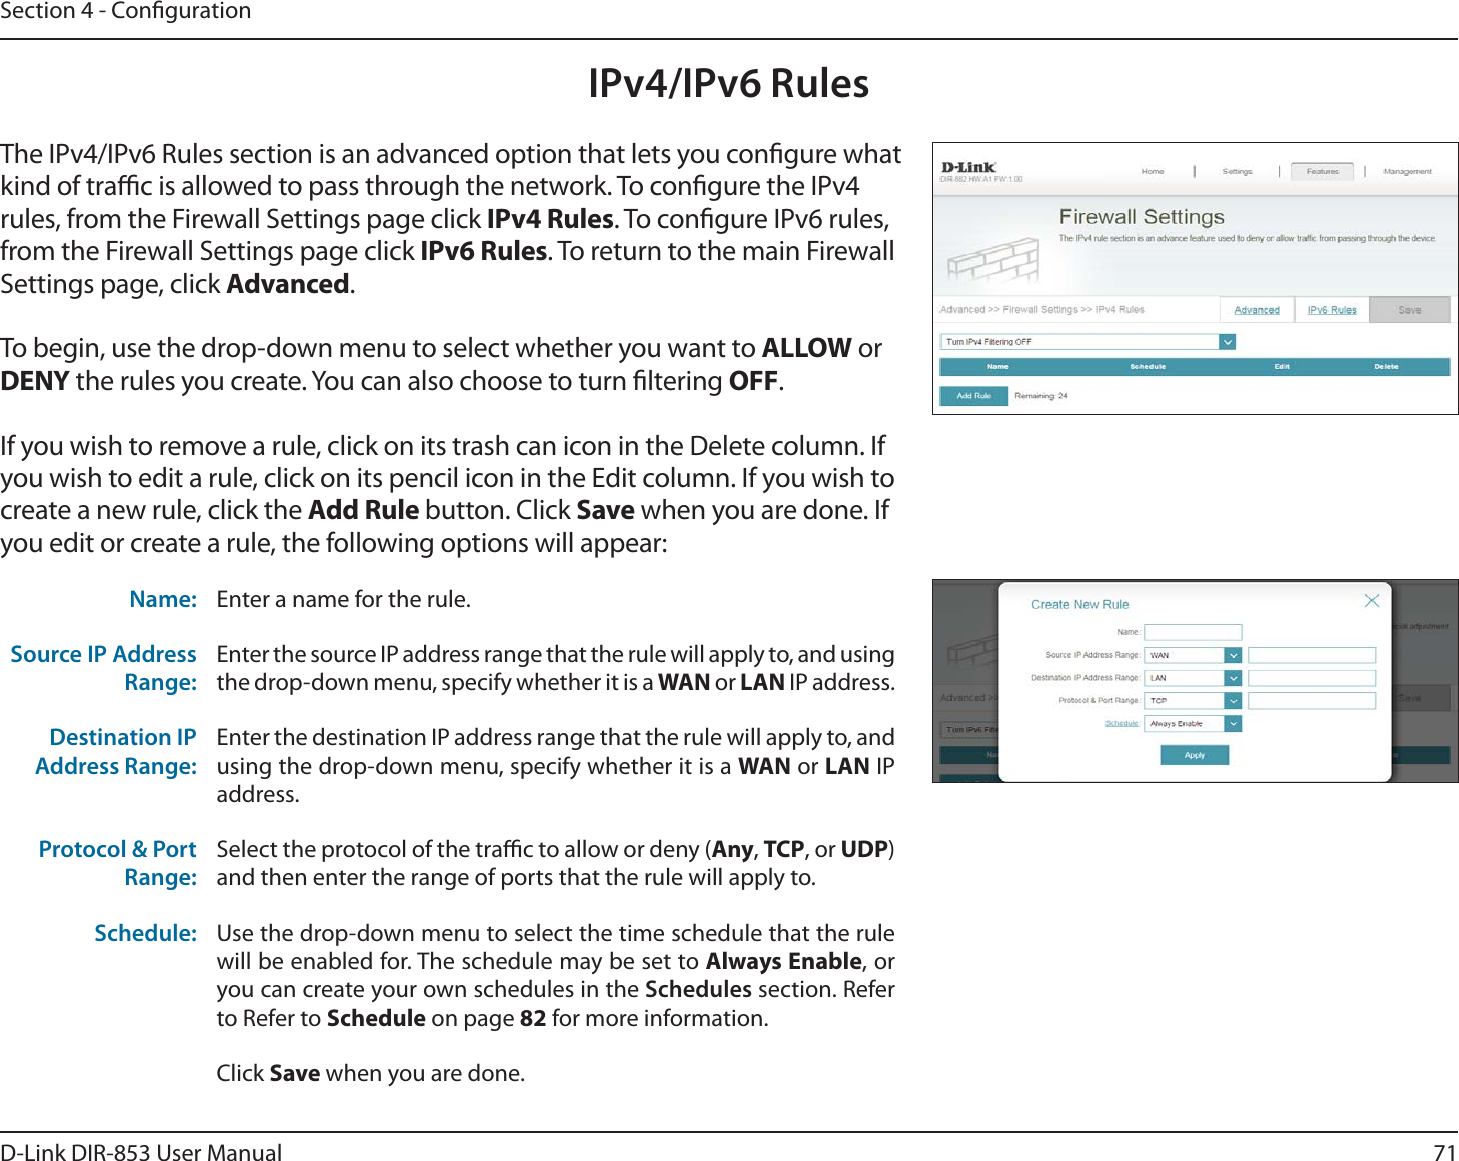 71D-Link DIR-853 User ManualSection 4 - CongurationIPv4/IPv6 RulesThe IPv4/IPv6 Rules section is an advanced option that lets you congure what kind of trac is allowed to pass through the network. To congure the IPv4 rules, from the Firewall Settings page click IPv4 Rules. To congure IPv6 rules, from the Firewall Settings page click IPv6 Rules. To return to the main Firewall Settings page, click Advanced.To begin, use the drop-down menu to select whether you want to ALLOW or DENY the rules you create. You can also choose to turn ltering OFF.If you wish to remove a rule, click on its trash can icon in the Delete column. If you wish to edit a rule, click on its pencil icon in the Edit column. If you wish to create a new rule, click the Add Rule button. Click Save when you are done. If you edit or create a rule, the following options will appear:Name: Enter a name for the rule.Source IP Address Range:Enter the source IP address range that the rule will apply to, and using the drop-down menu, specify whether it is a WAN or LAN IP address.Destination IP Address Range:Enter the destination IP address range that the rule will apply to, and using the drop-down menu, specify whether it is a WAN or LAN IP address.Protocol &amp; Port Range:Select the protocol of the trac to allow or deny (Any, TCP, or UDP) and then enter the range of ports that the rule will apply to.Schedule: Use the drop-down menu to select the time schedule that the rule will be enabled for. The schedule may be set to Always Enable, or you can create your own schedules in the Schedules section. Refer to Refer to Schedule on page 82 for more information.Click Save when you are done.